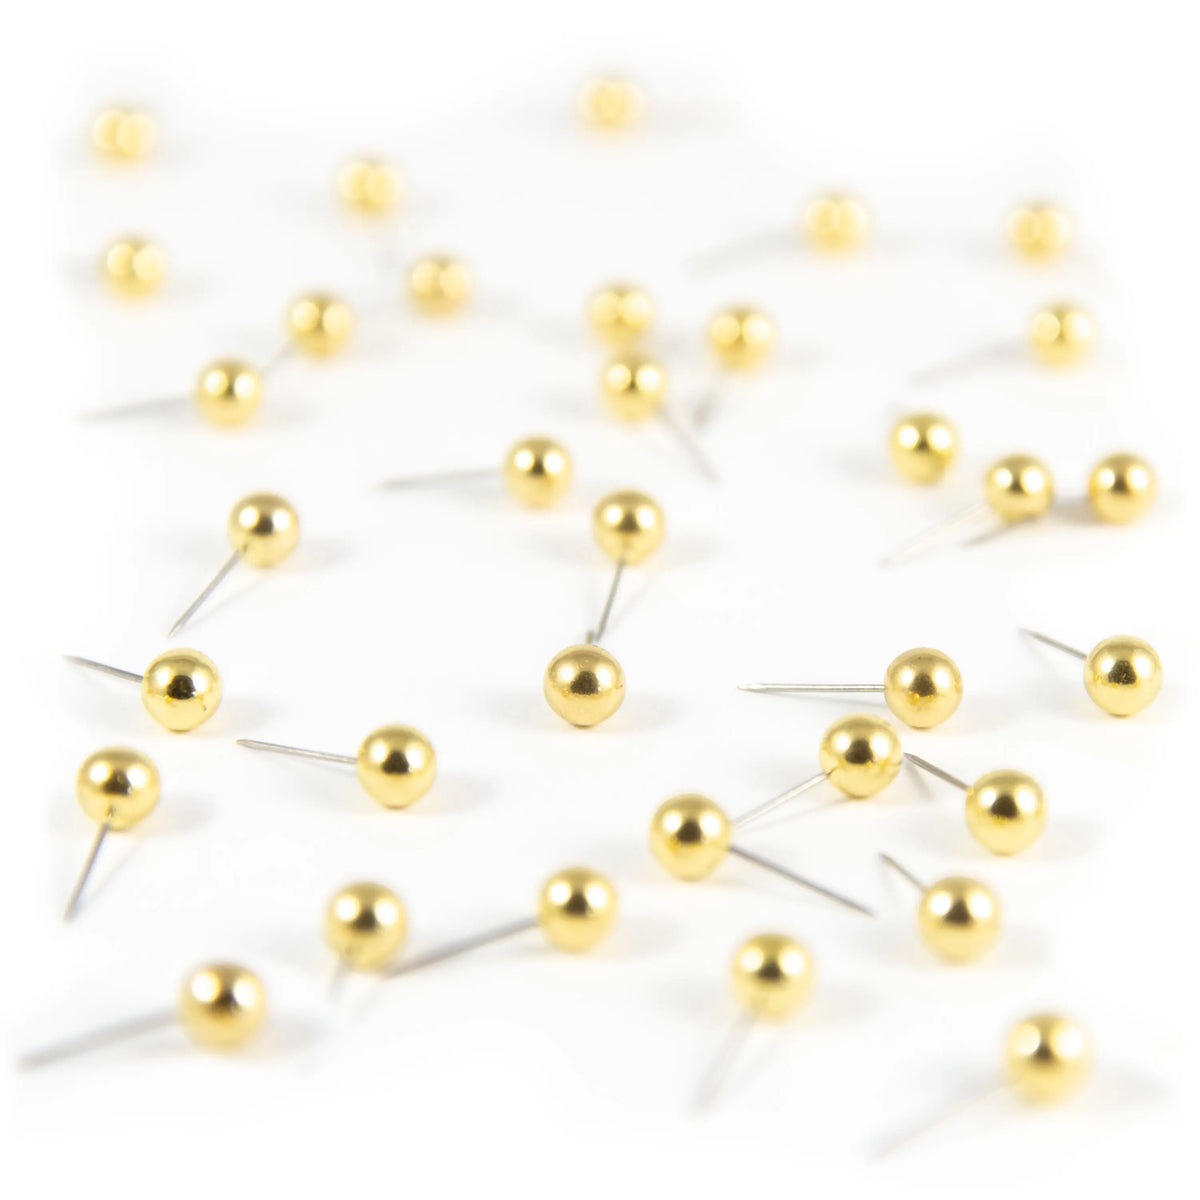 Map Push Pins - Gold Pins, Made in the USA